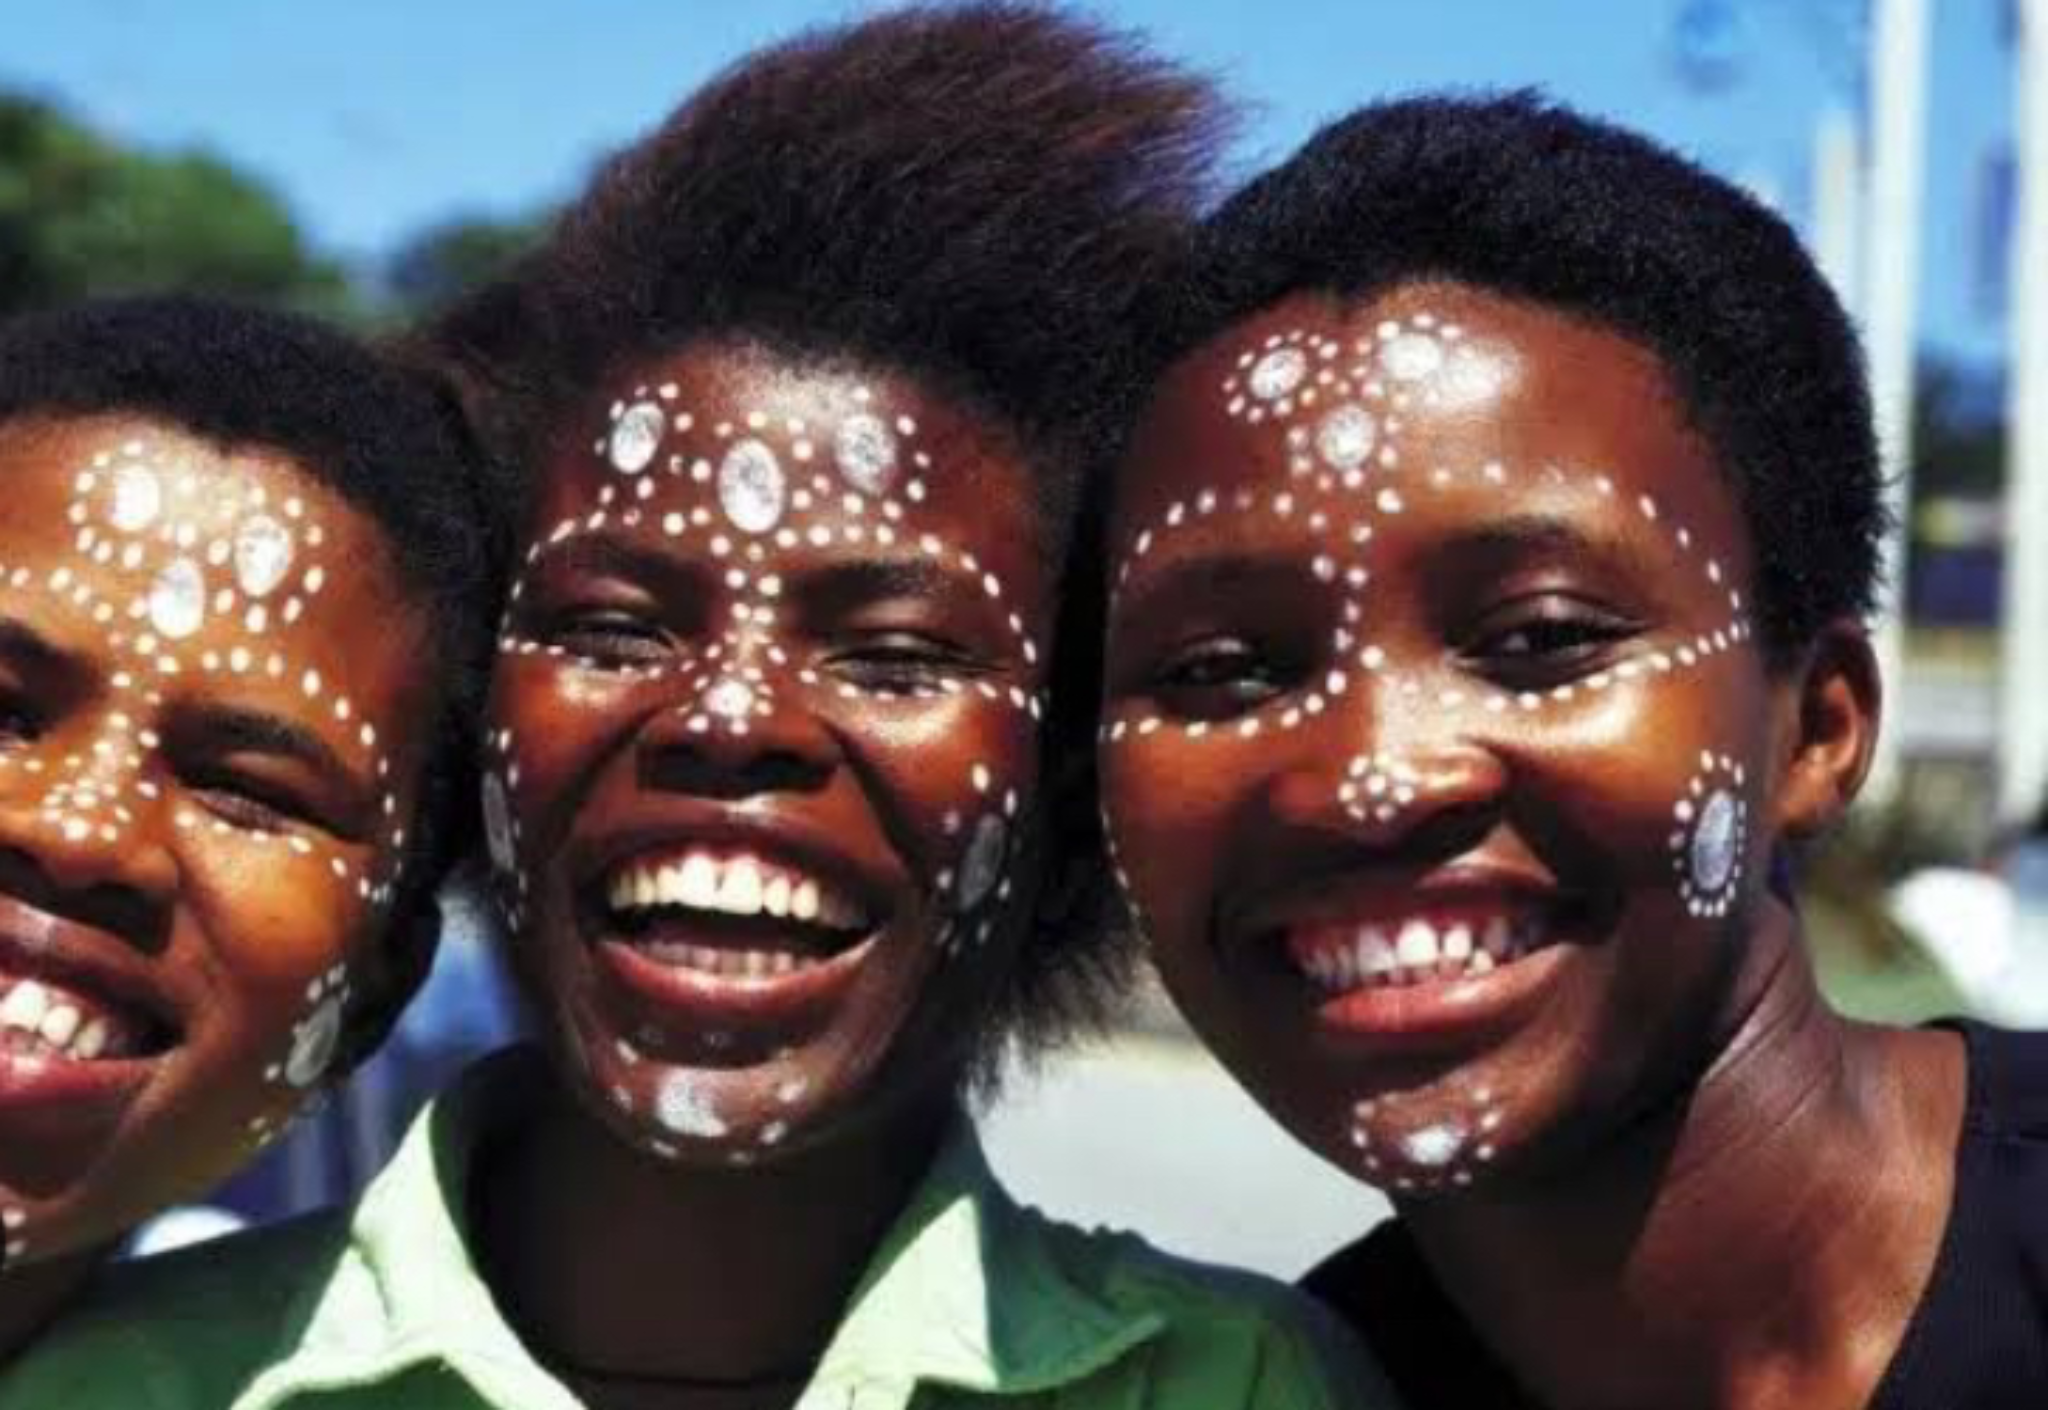 Top 10 Happiest Countries in Africa: Countries With Happiest People